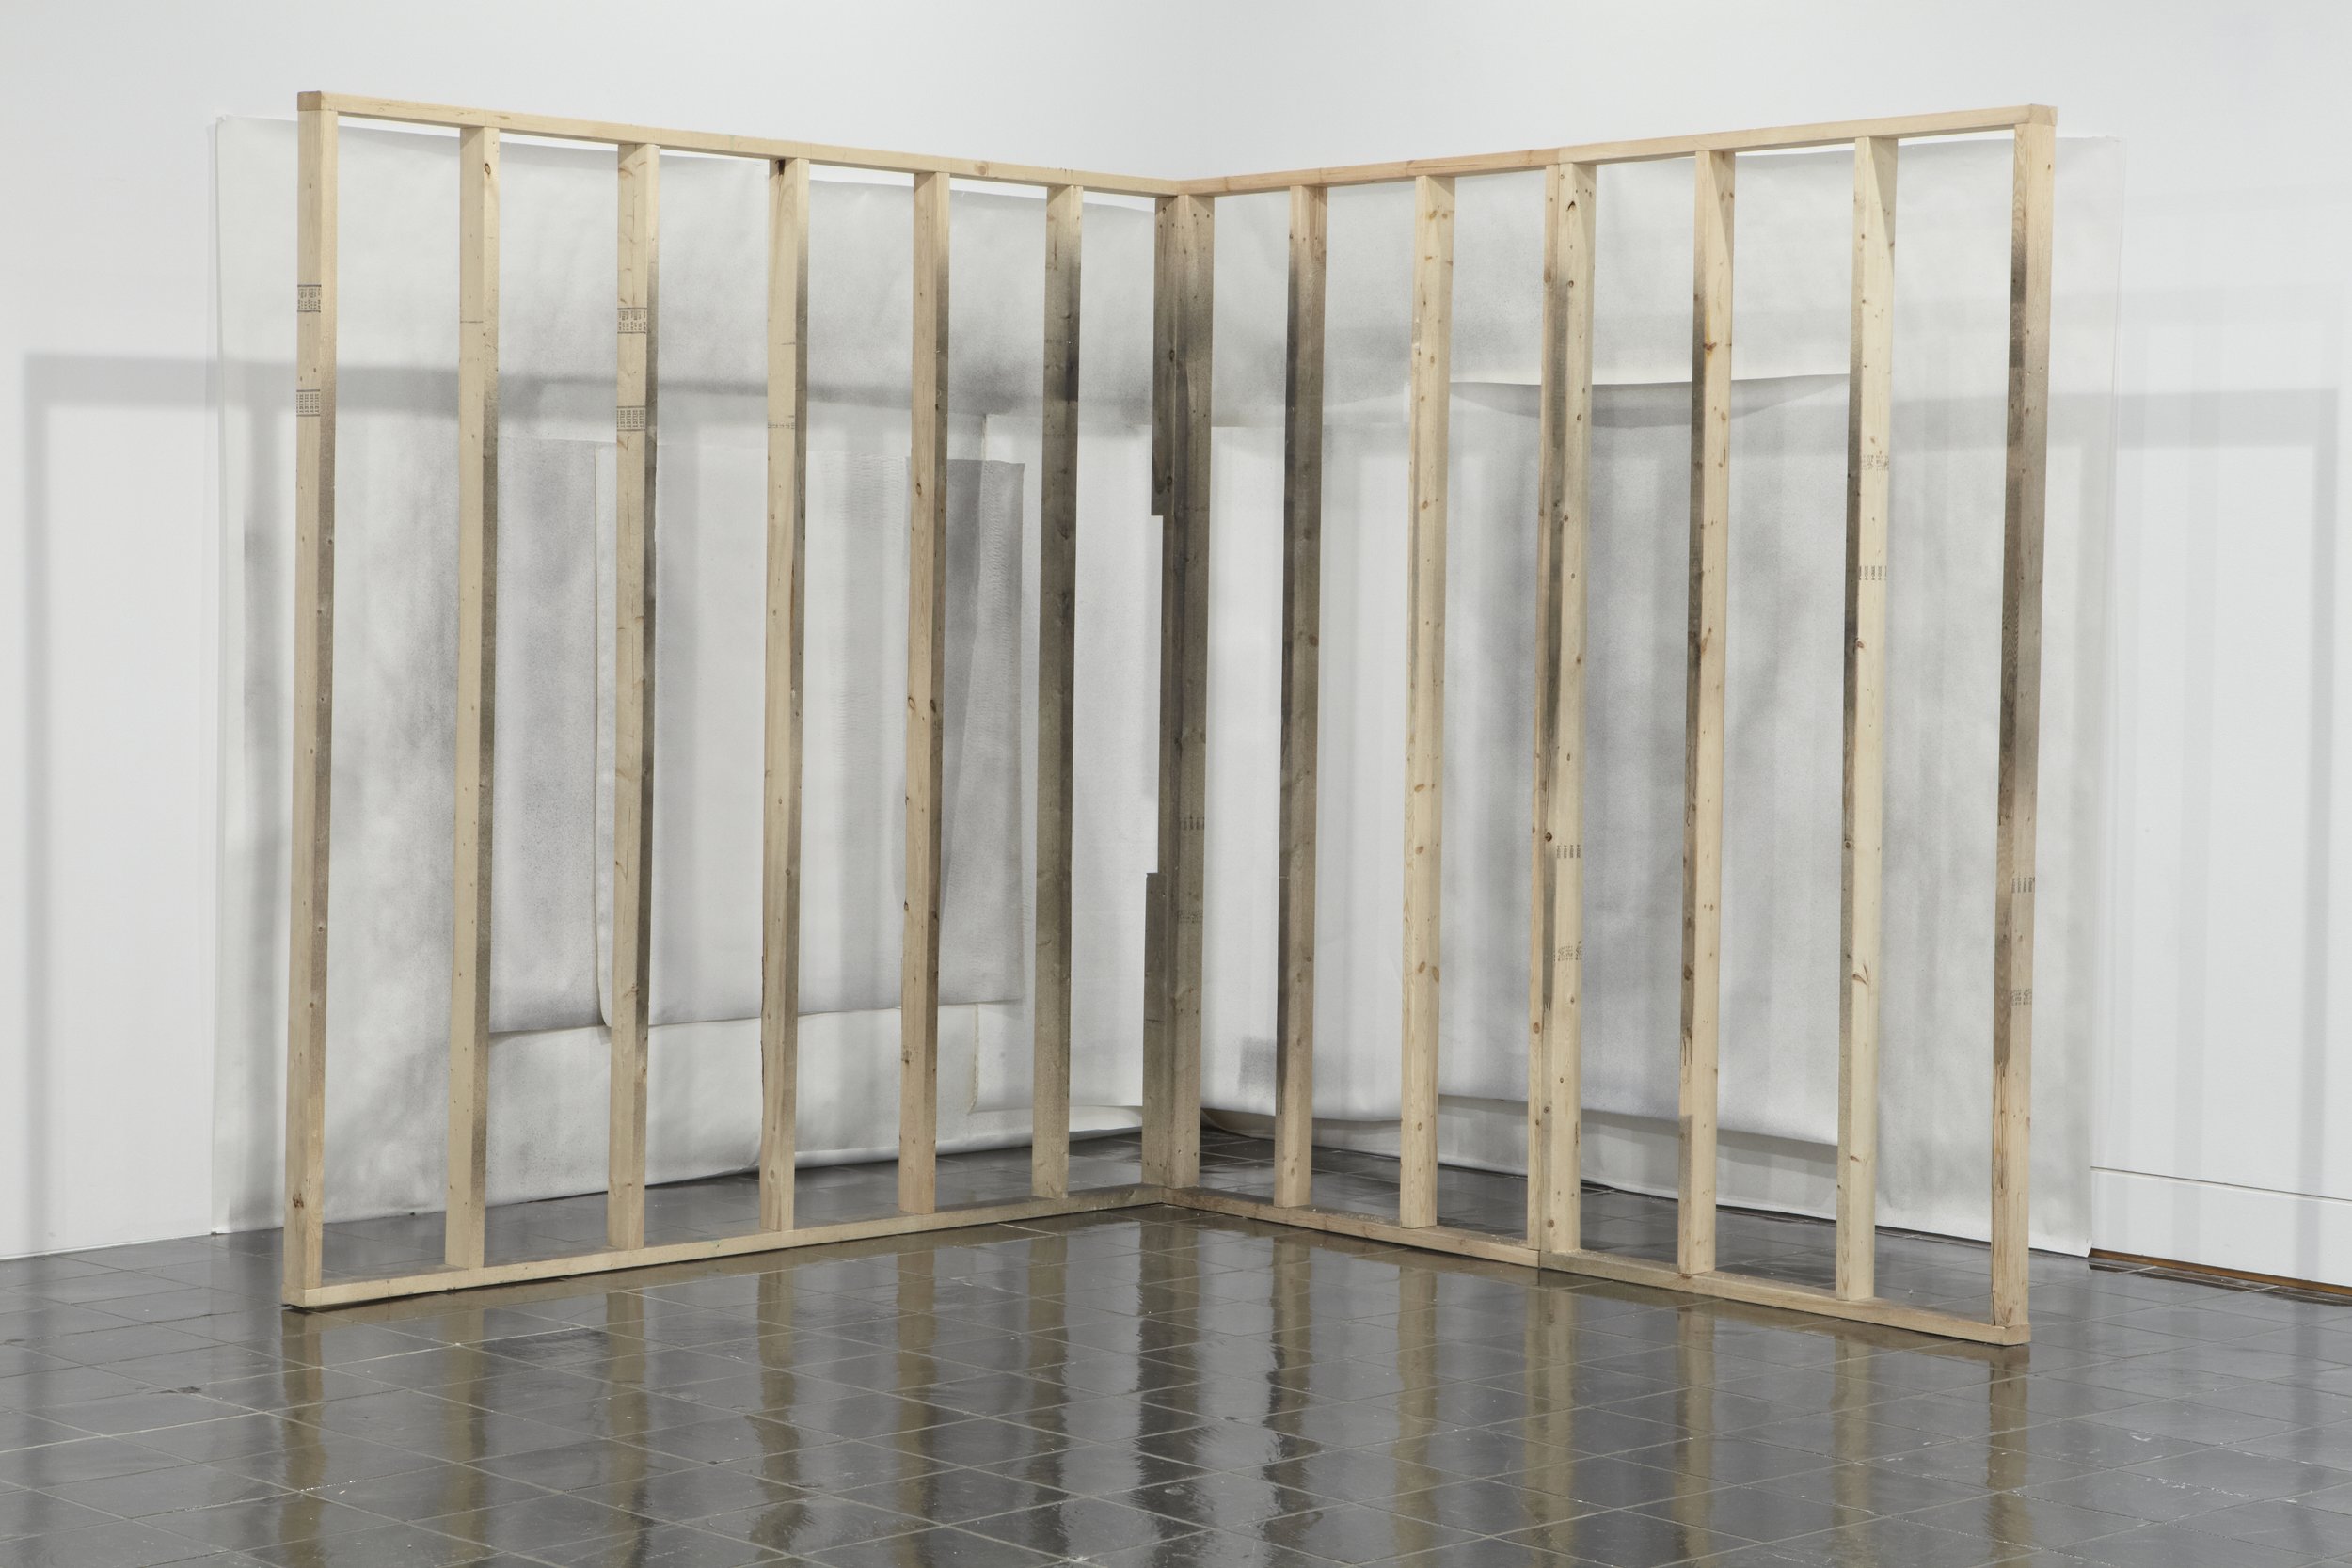  Laura Lisbon,&nbsp; Corner Set-up (Wall Displacement) , 2009. Wood, paper, canvas, acrylic paint dimensions variable. Courtesy of the artist. 